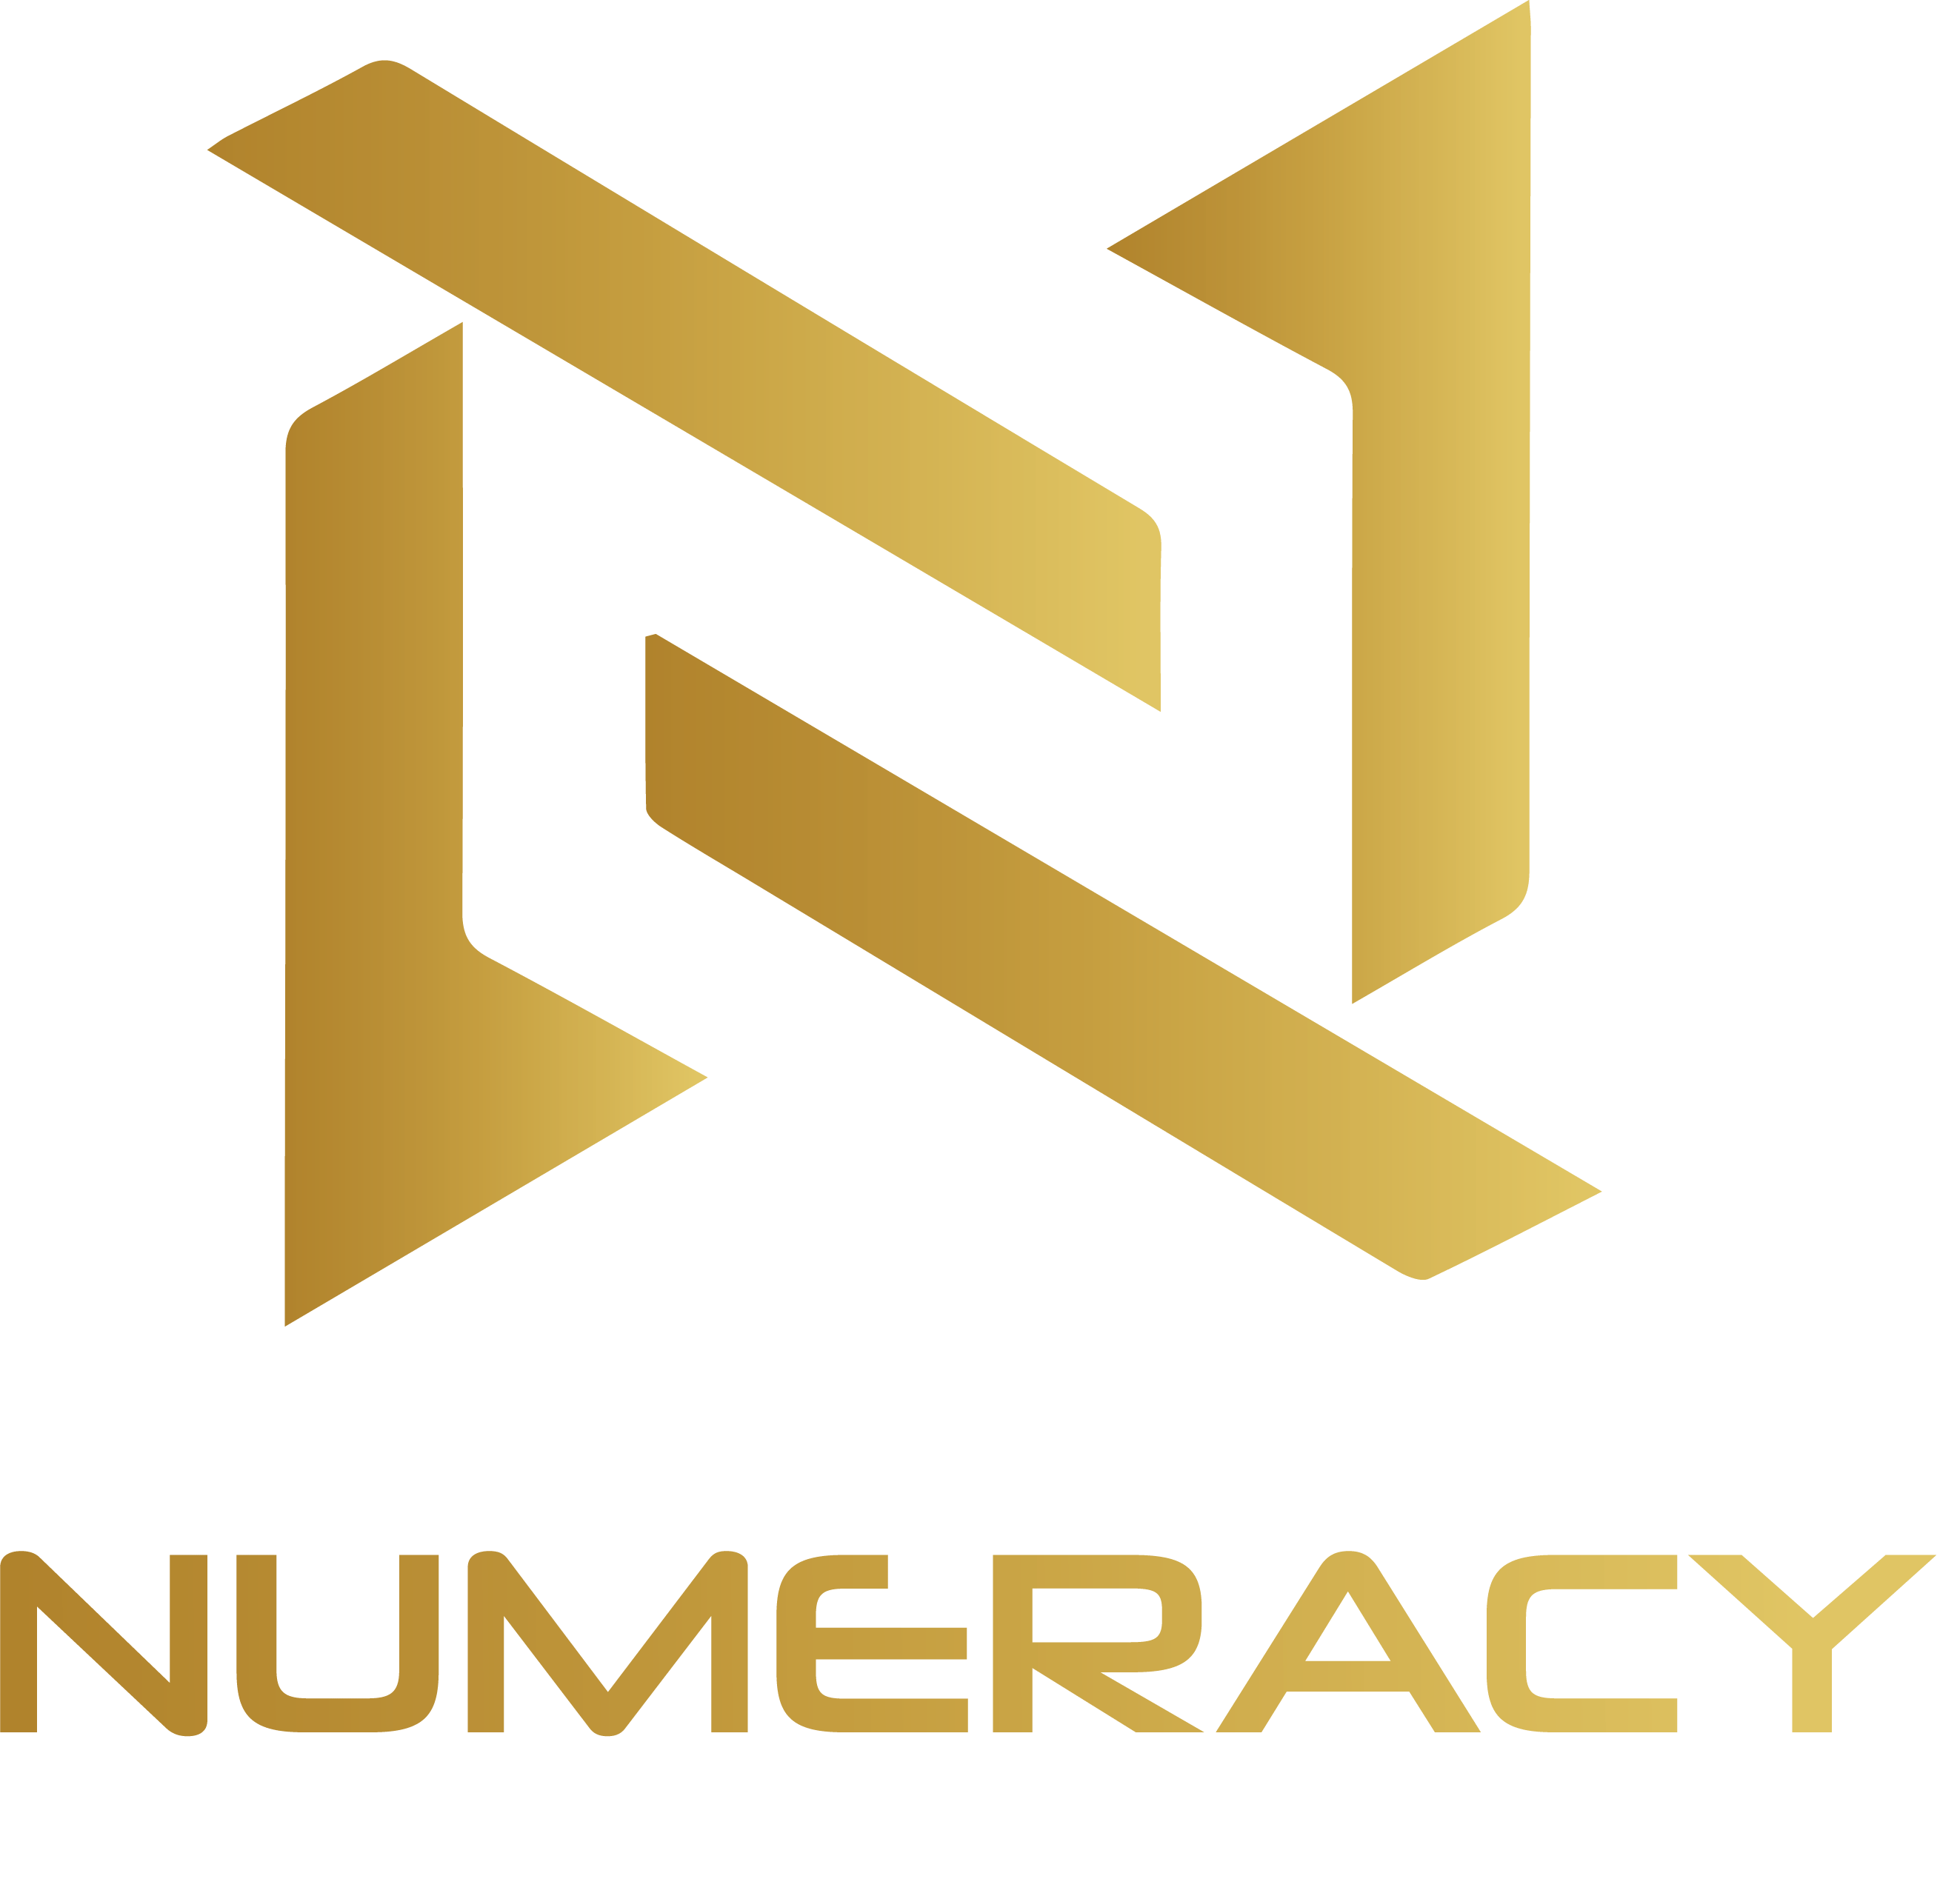 Numeracy Accounting Solutions